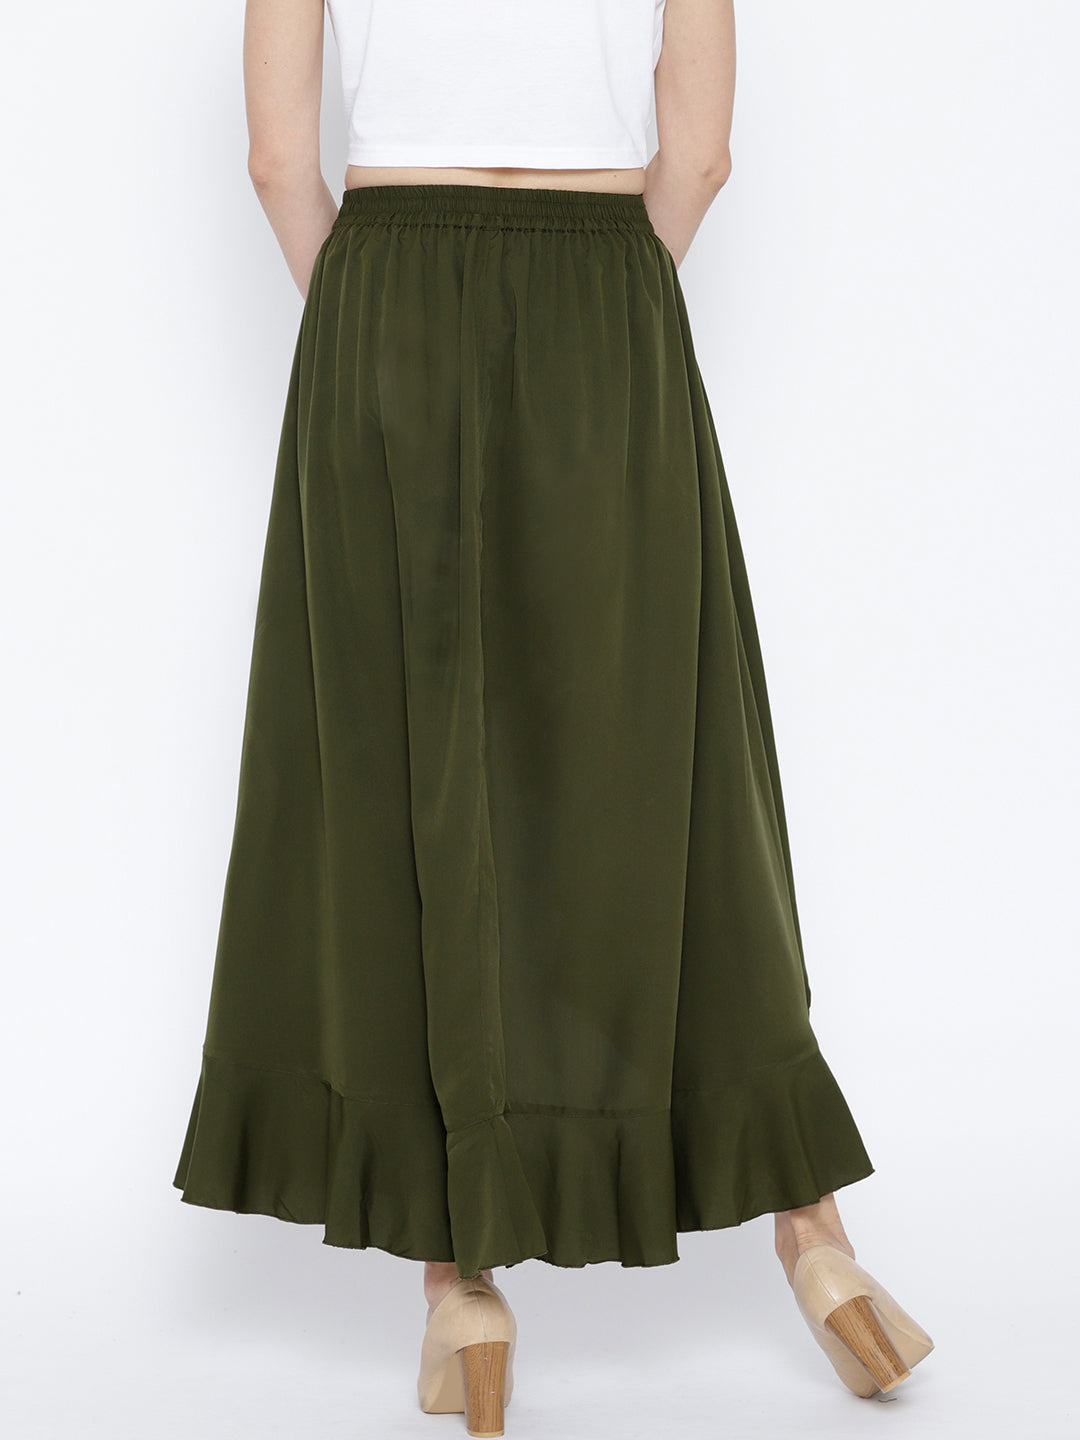 Berrylush Women Olive Green Solid Ruffled Flared Maxi Skirt with Attac